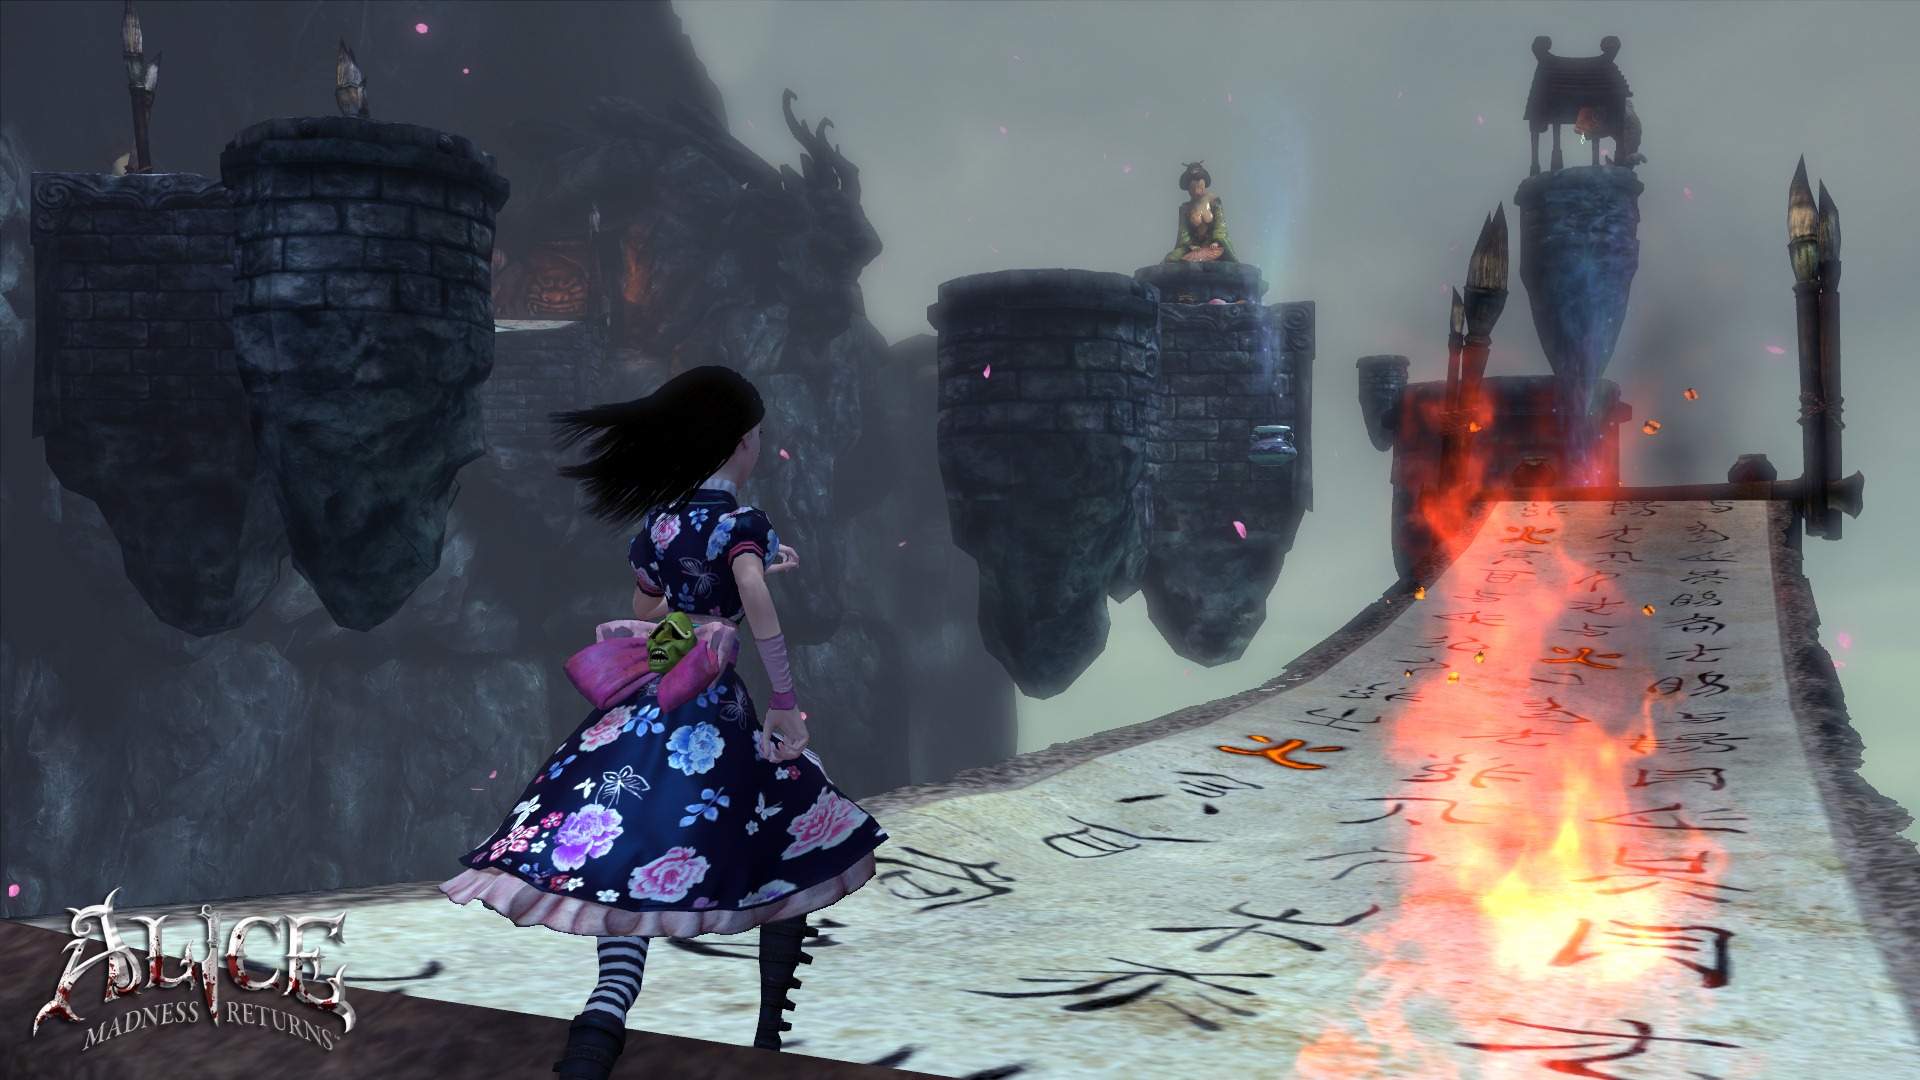 Preview: Alice: Madness Returns – Destructoid